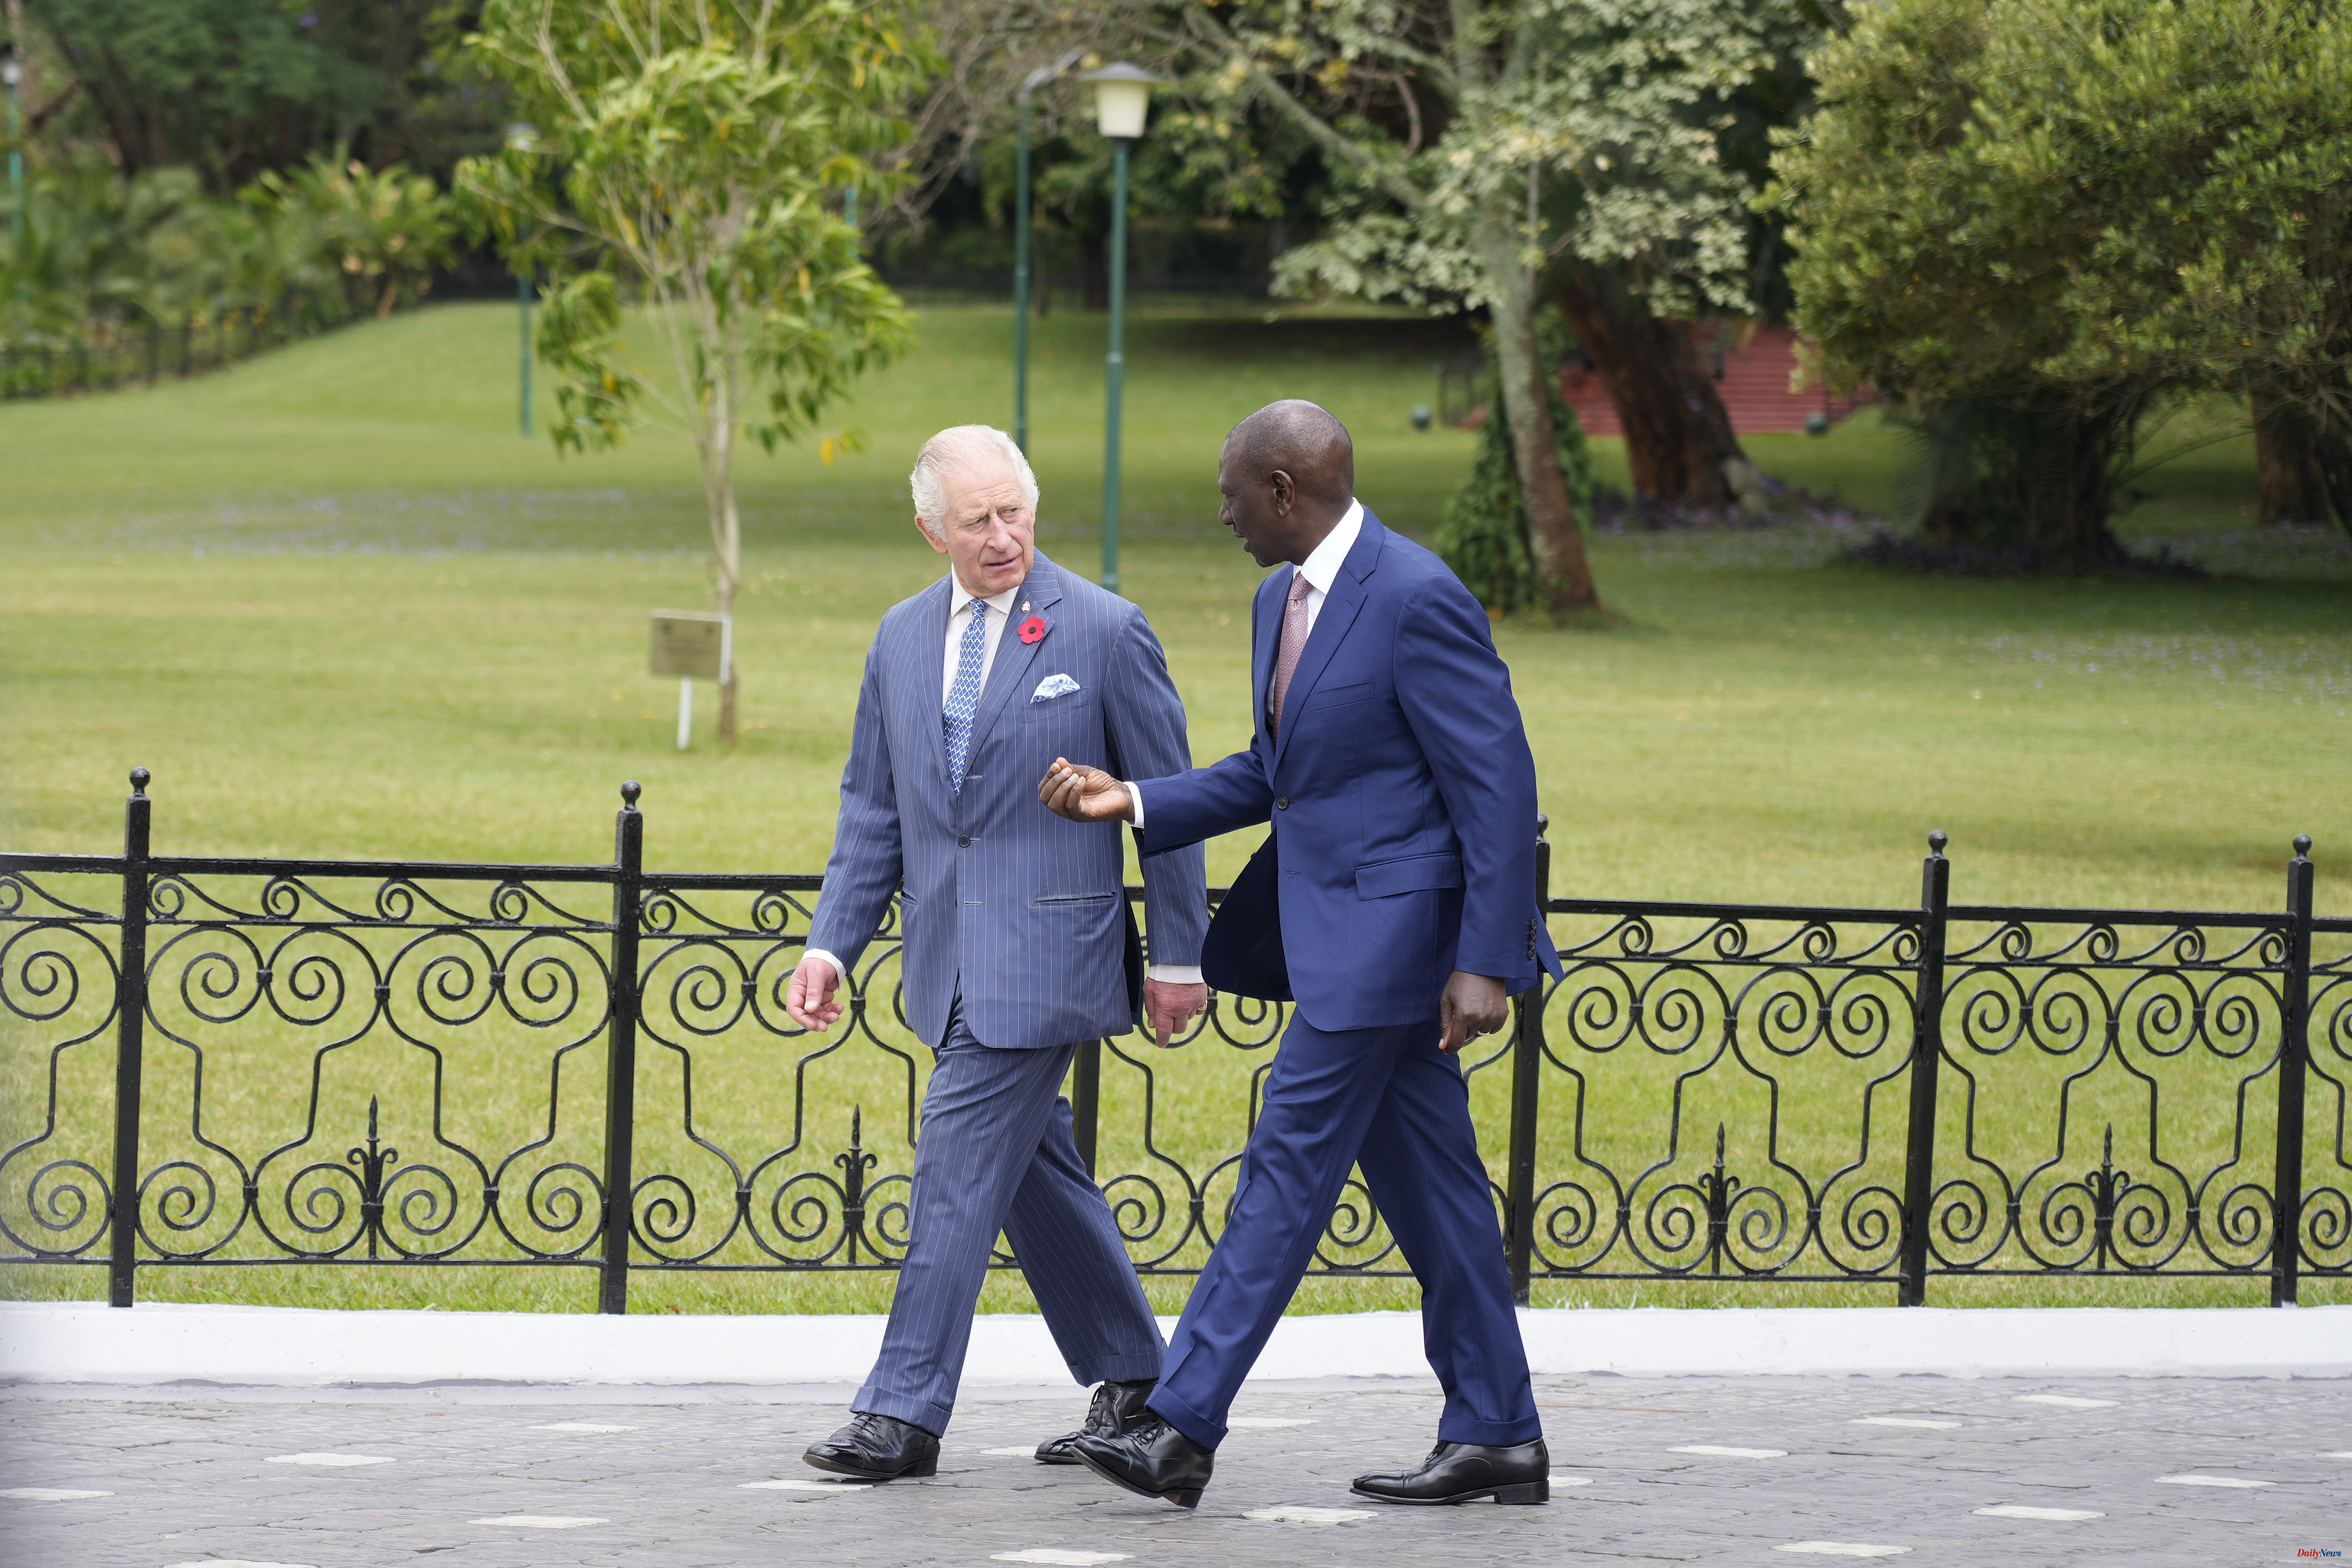 Africa Kenya demands an "unequivocal apology" from King Charles for the abuses of colonialism